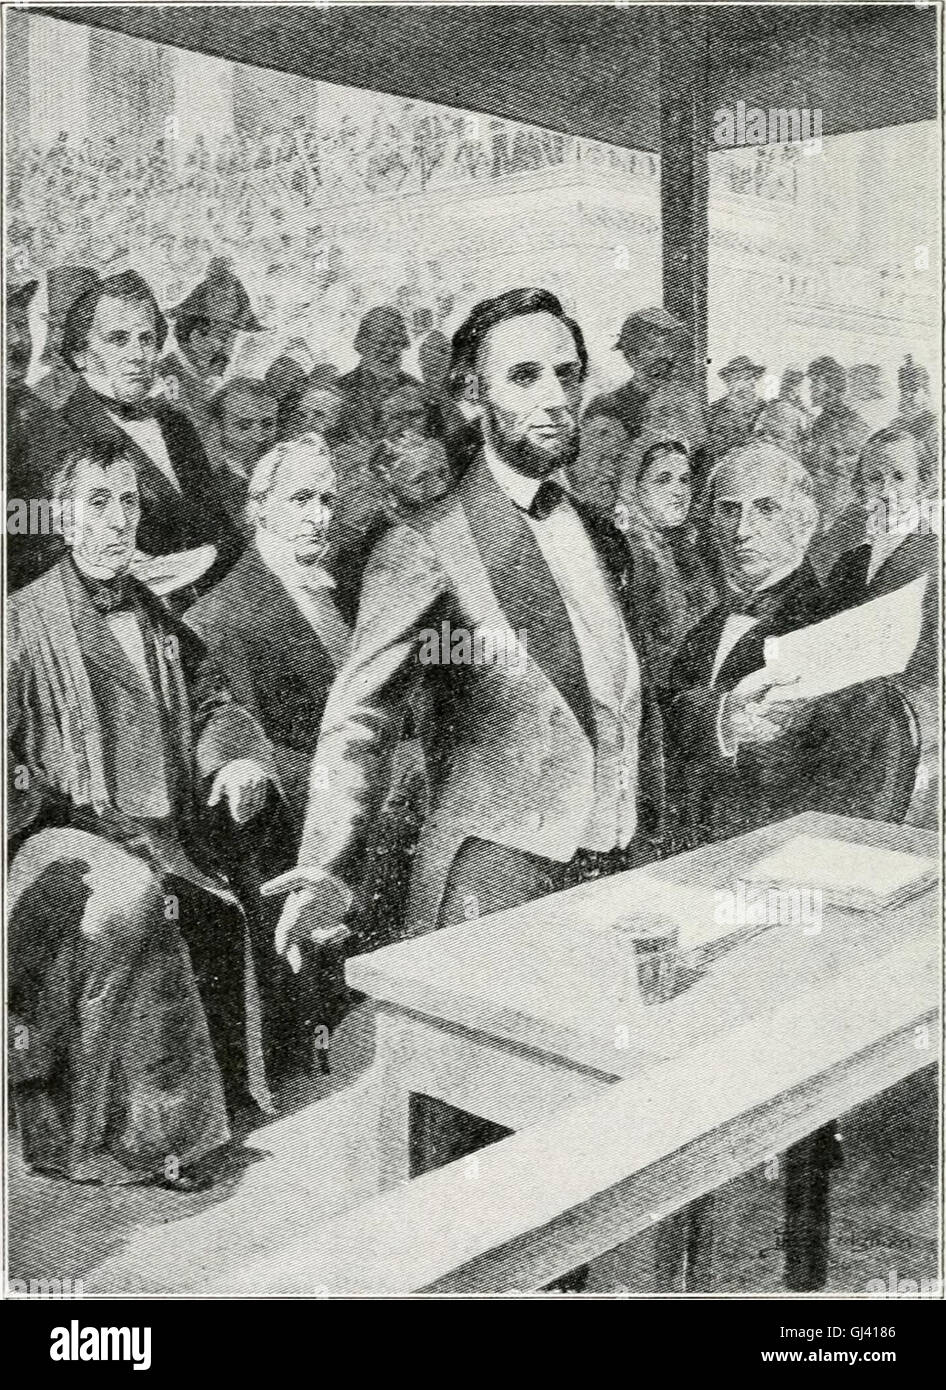 Mr. Nussbaum - Abraham Lincoln Biography in Seven Pages